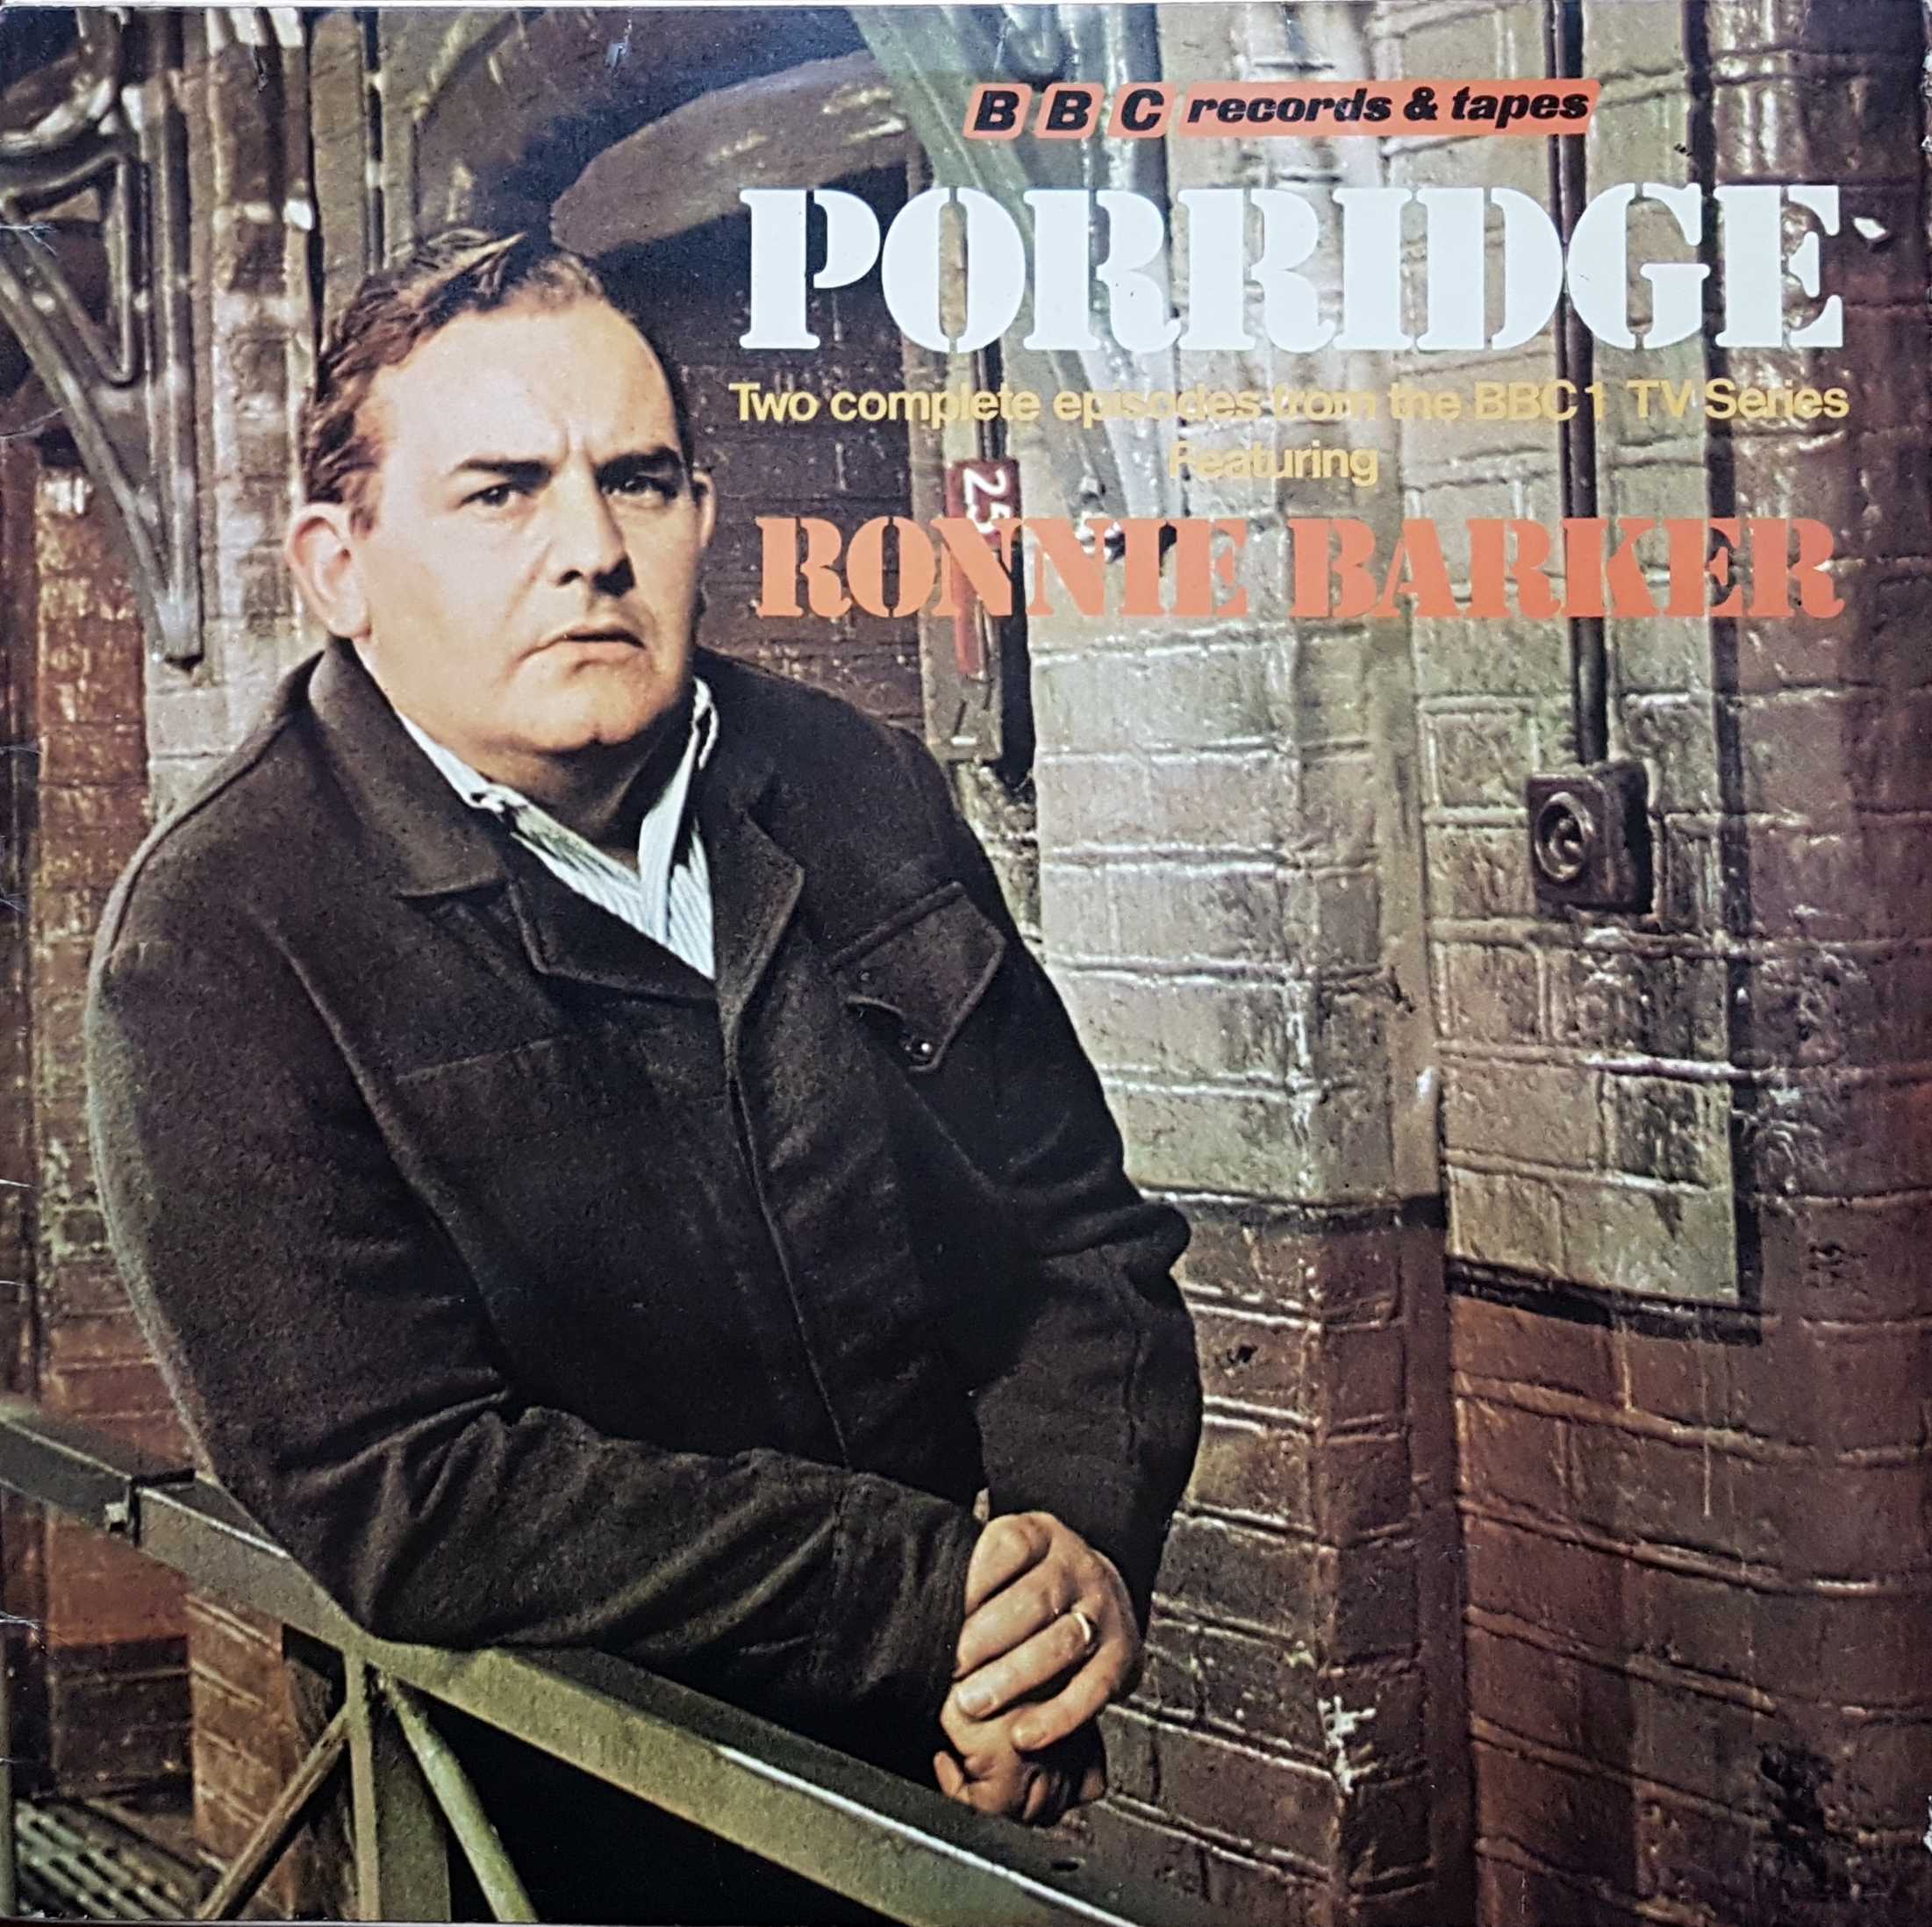 Picture of REB 270 Porridge - An evening in by artist Dick Clement / Ian La Frenais  from the BBC albums - Records and Tapes library